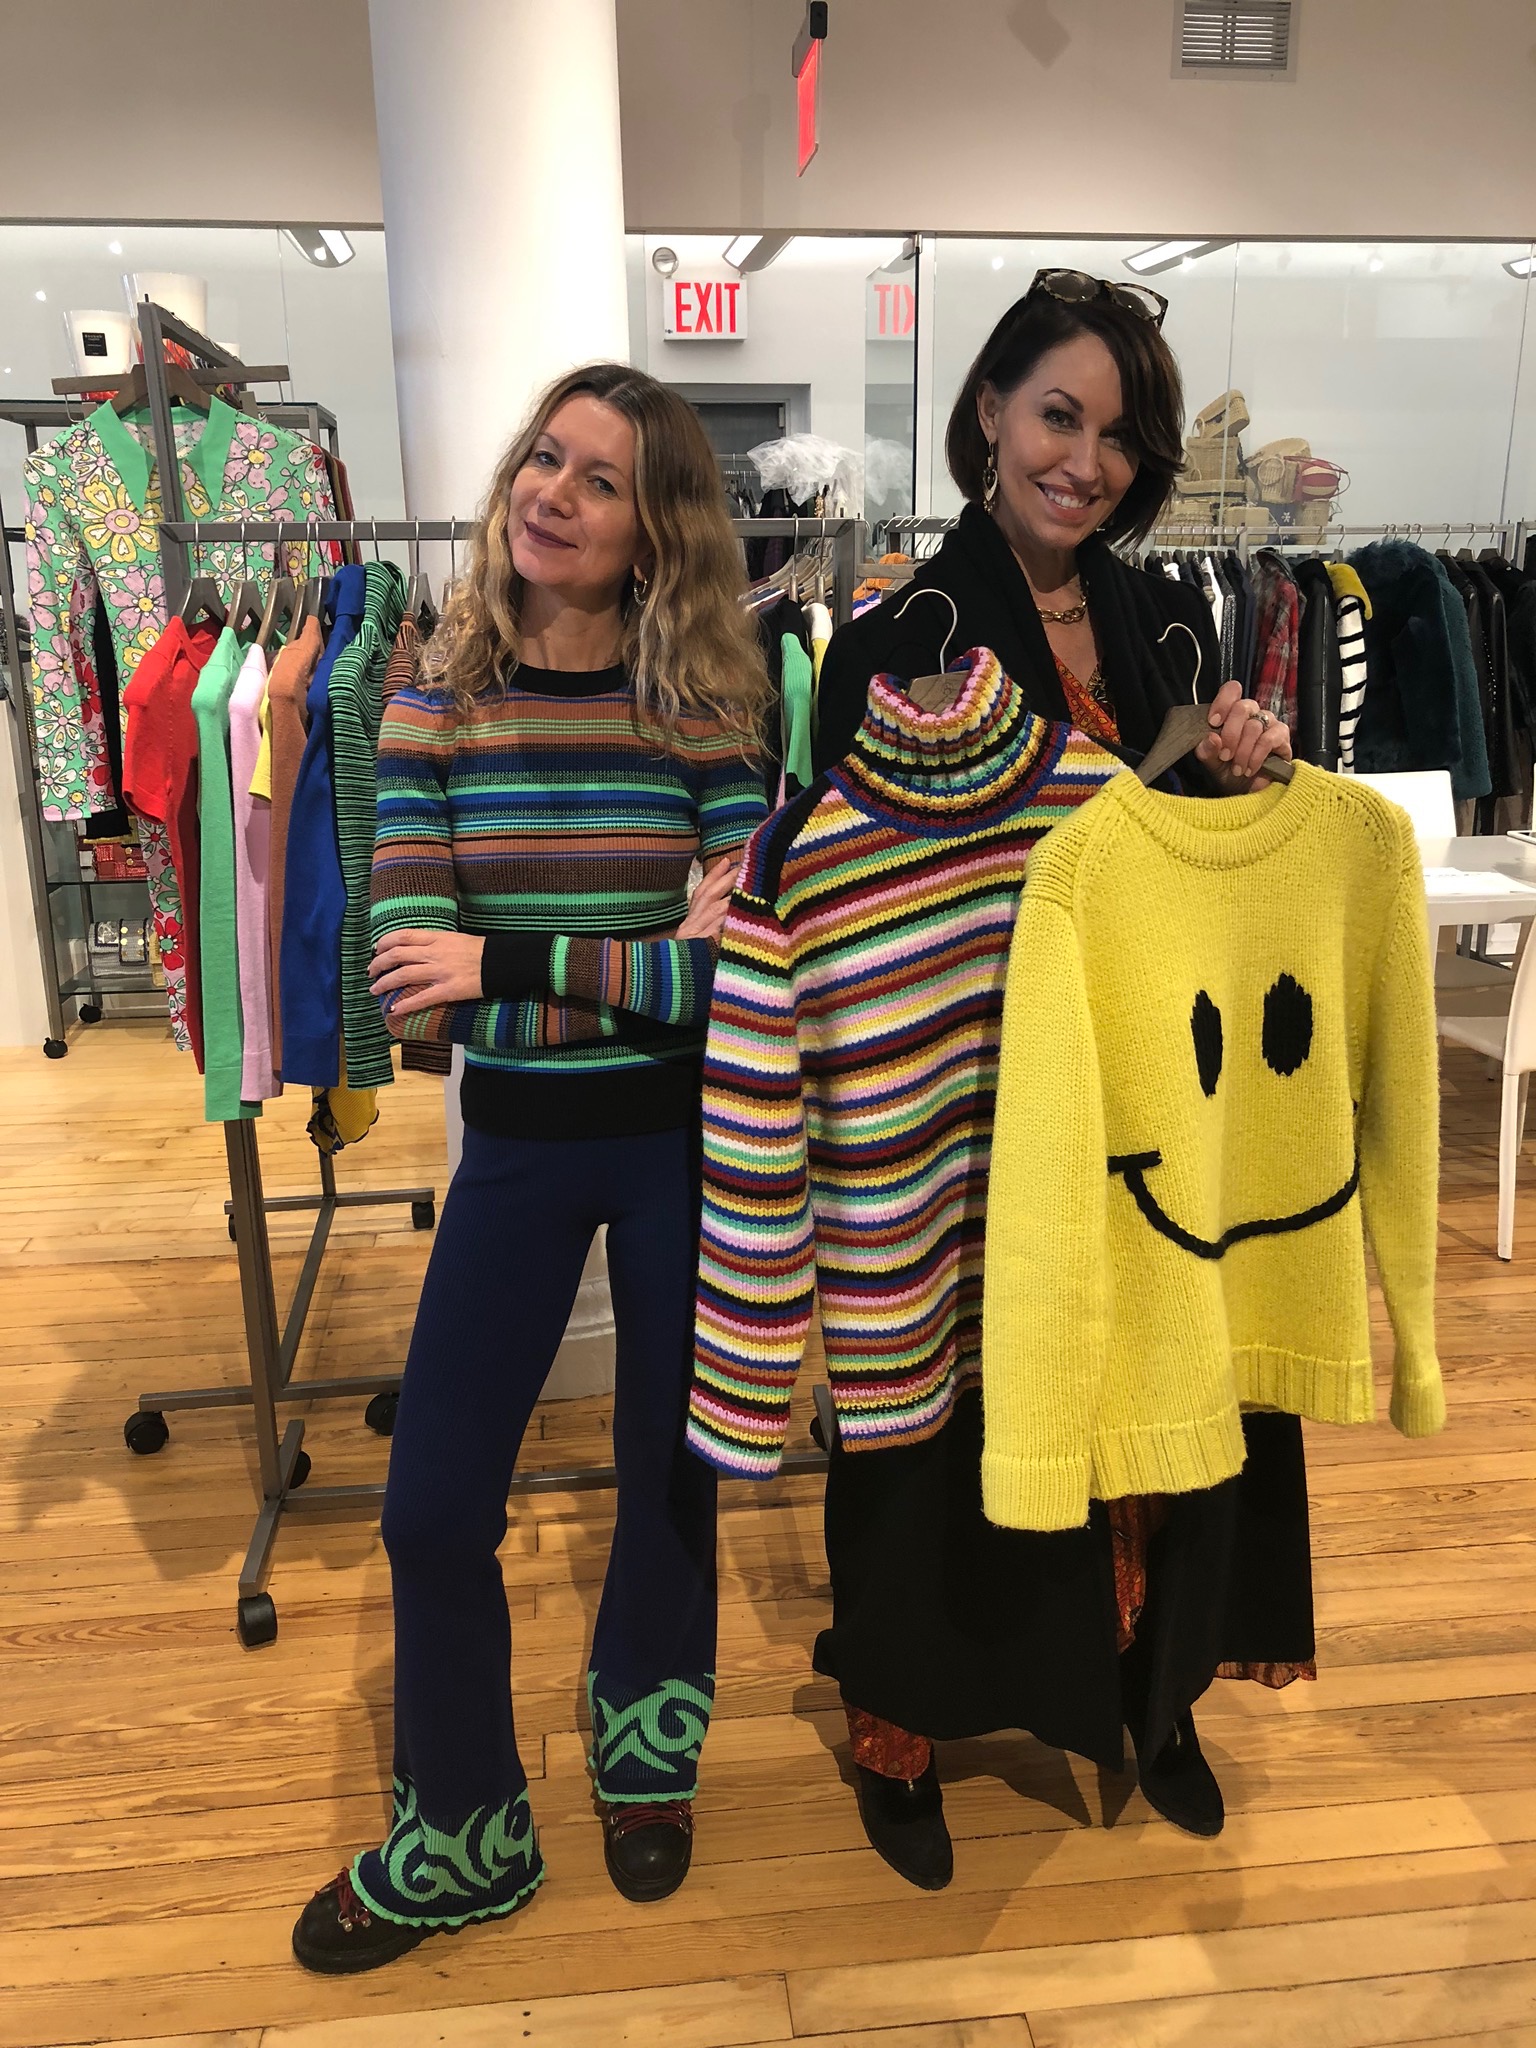 Two women: one wearing a rainbow stripe sweater, the other is holding up a rainbow strip turtleneck sweater and a yellow smiley face sweater. One has blonde wave hair and the other has short brown straight hair